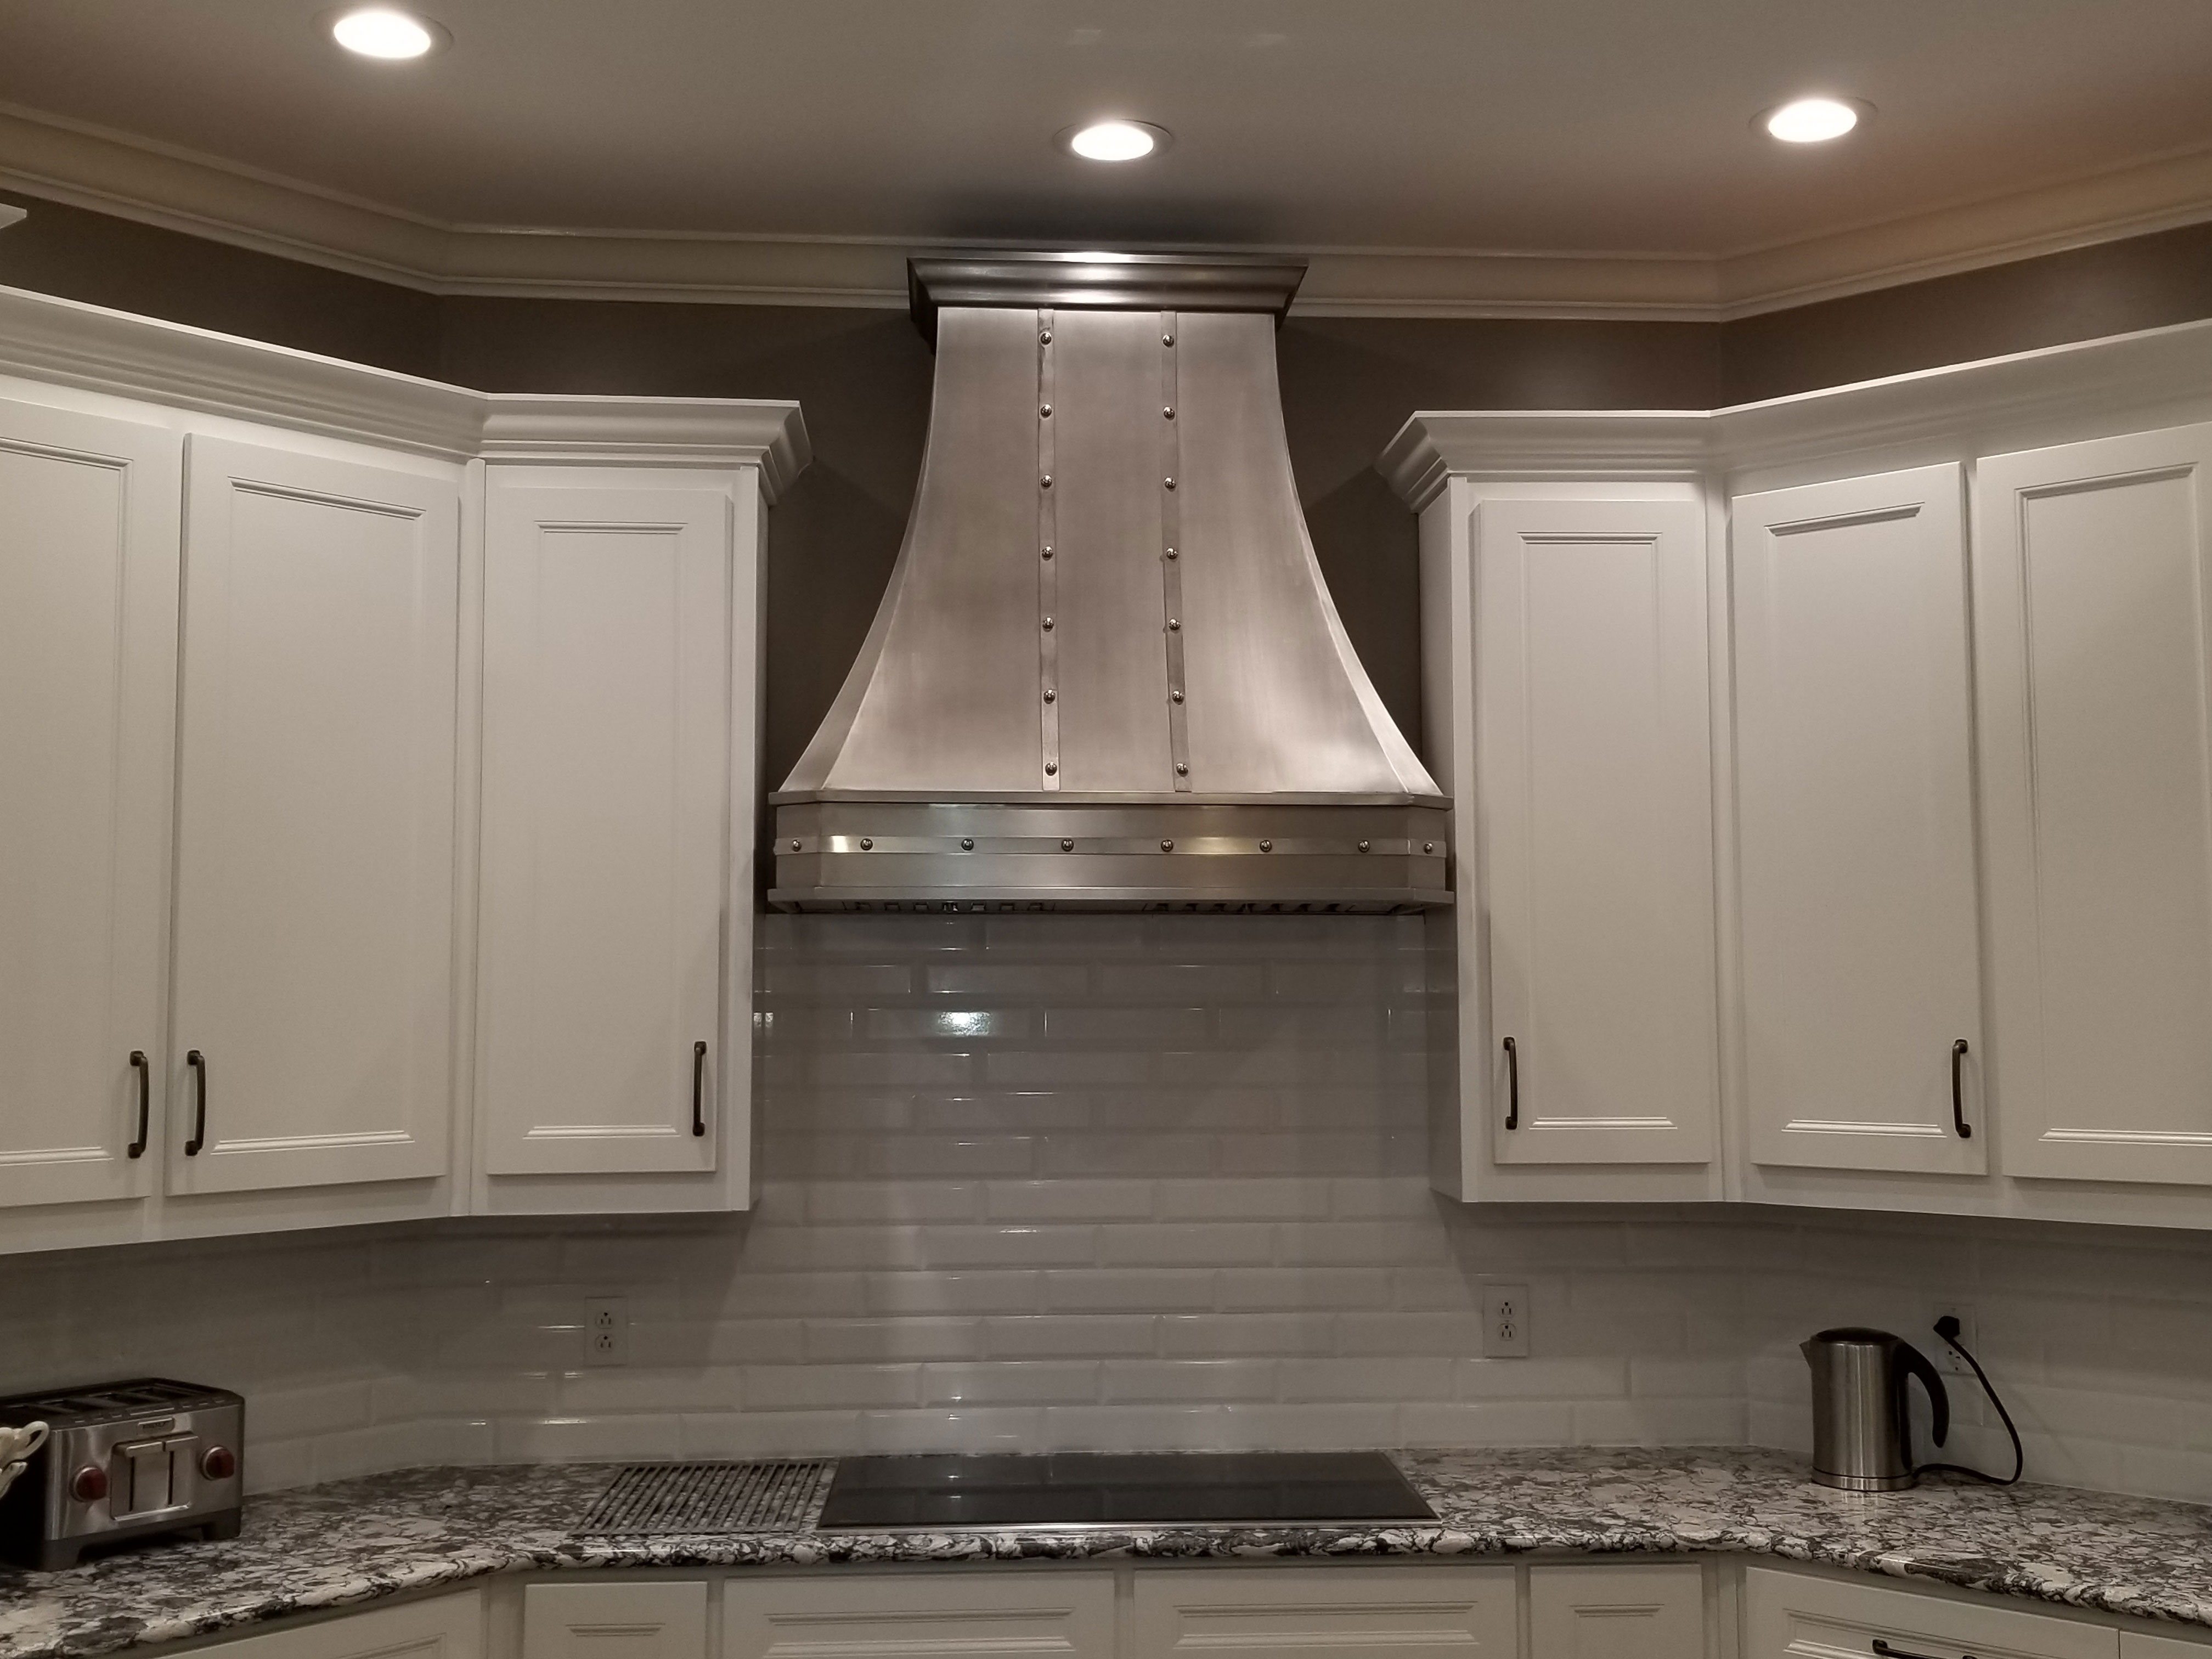 Stainless steel range hood with rivets and bands. World CopperSmith